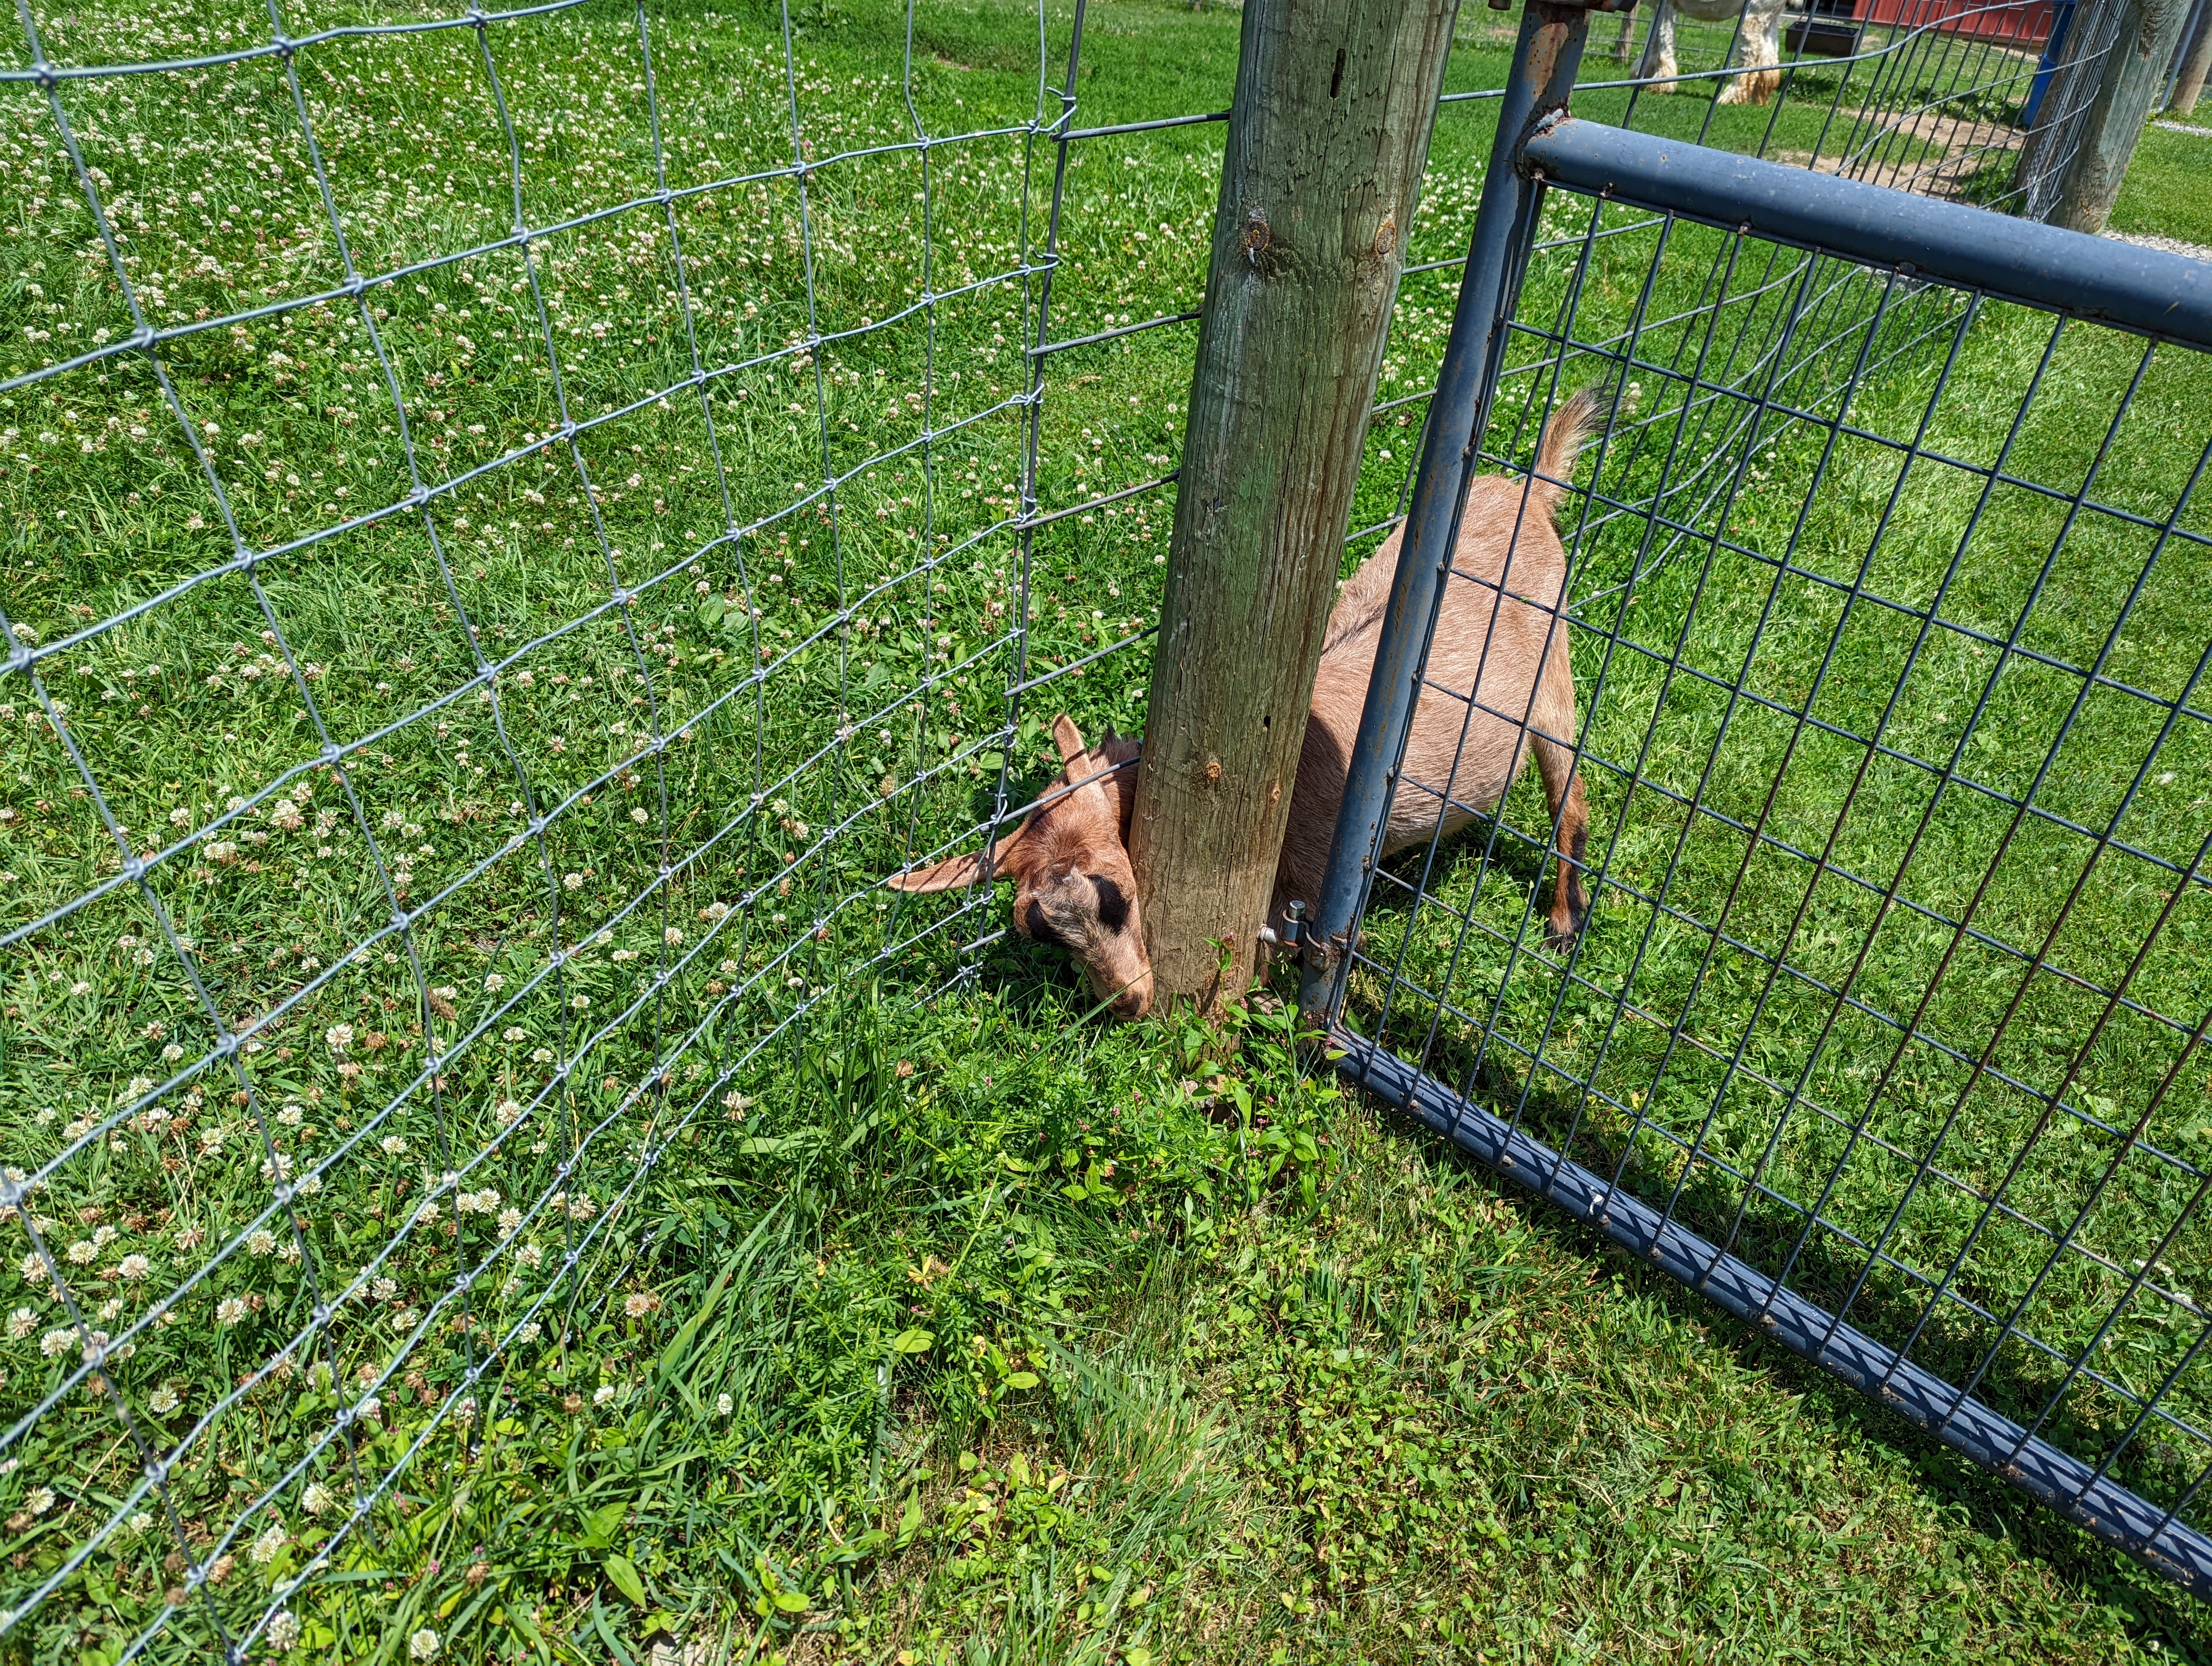 A goat reaching its head through a fence to get to some grass. There is plenty of grass within the goat's enclosure.